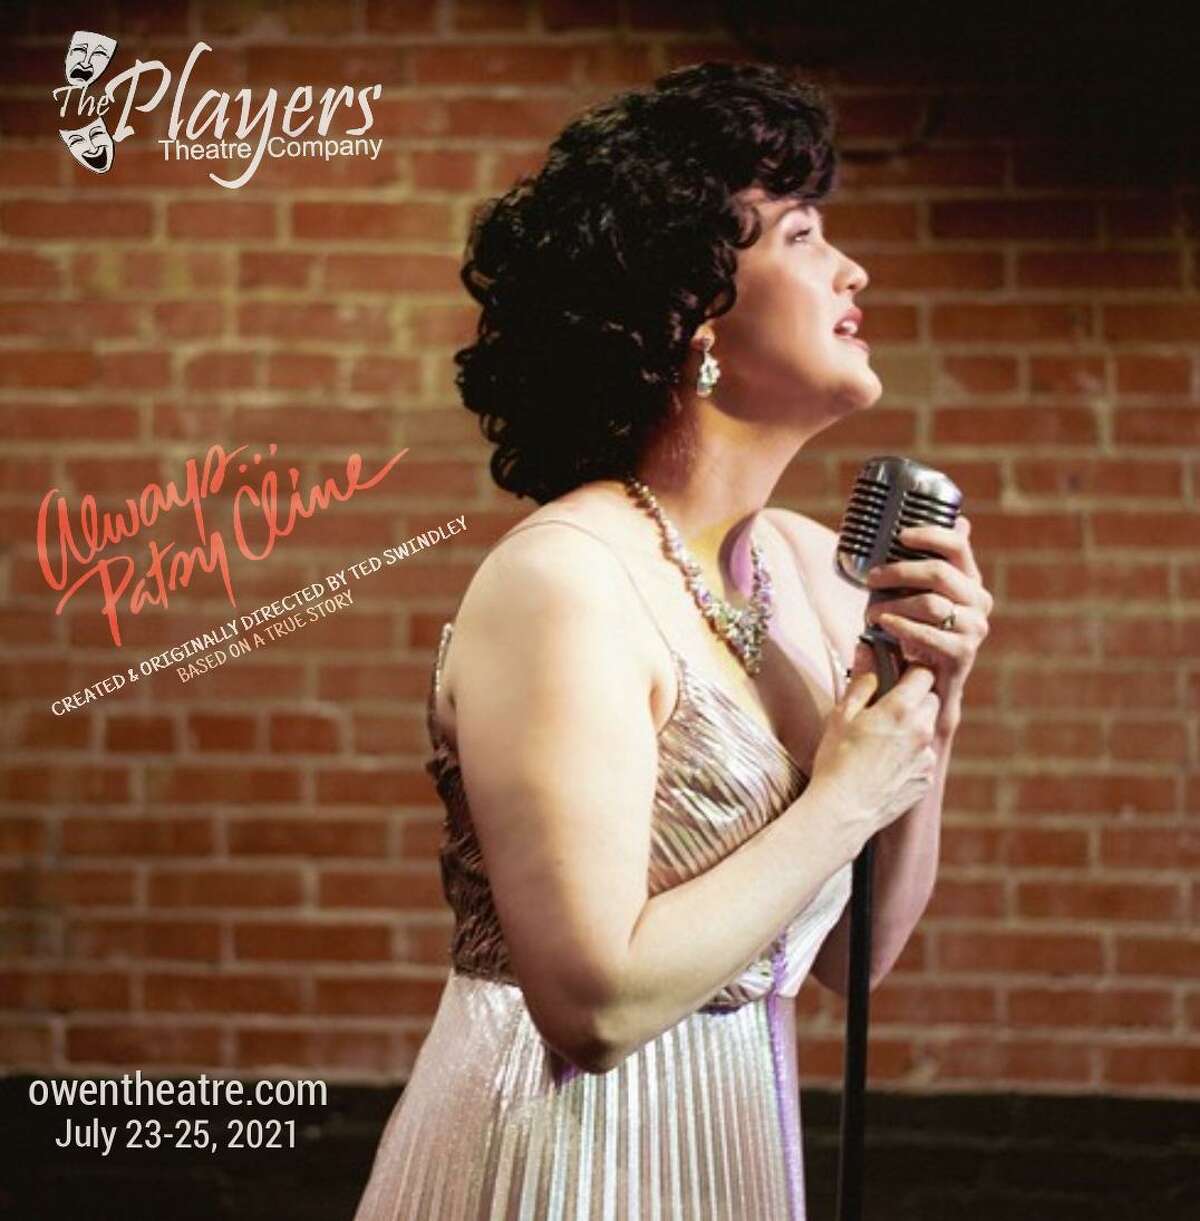 Theresa Black is Patsy Cline in The Players Theater Company's upcoming fundraiser show "Always ... Patsy Cline." They’ll perform the show as a fundraiser July 22-24 and Aug. 12-14 at the Owen Theatre.